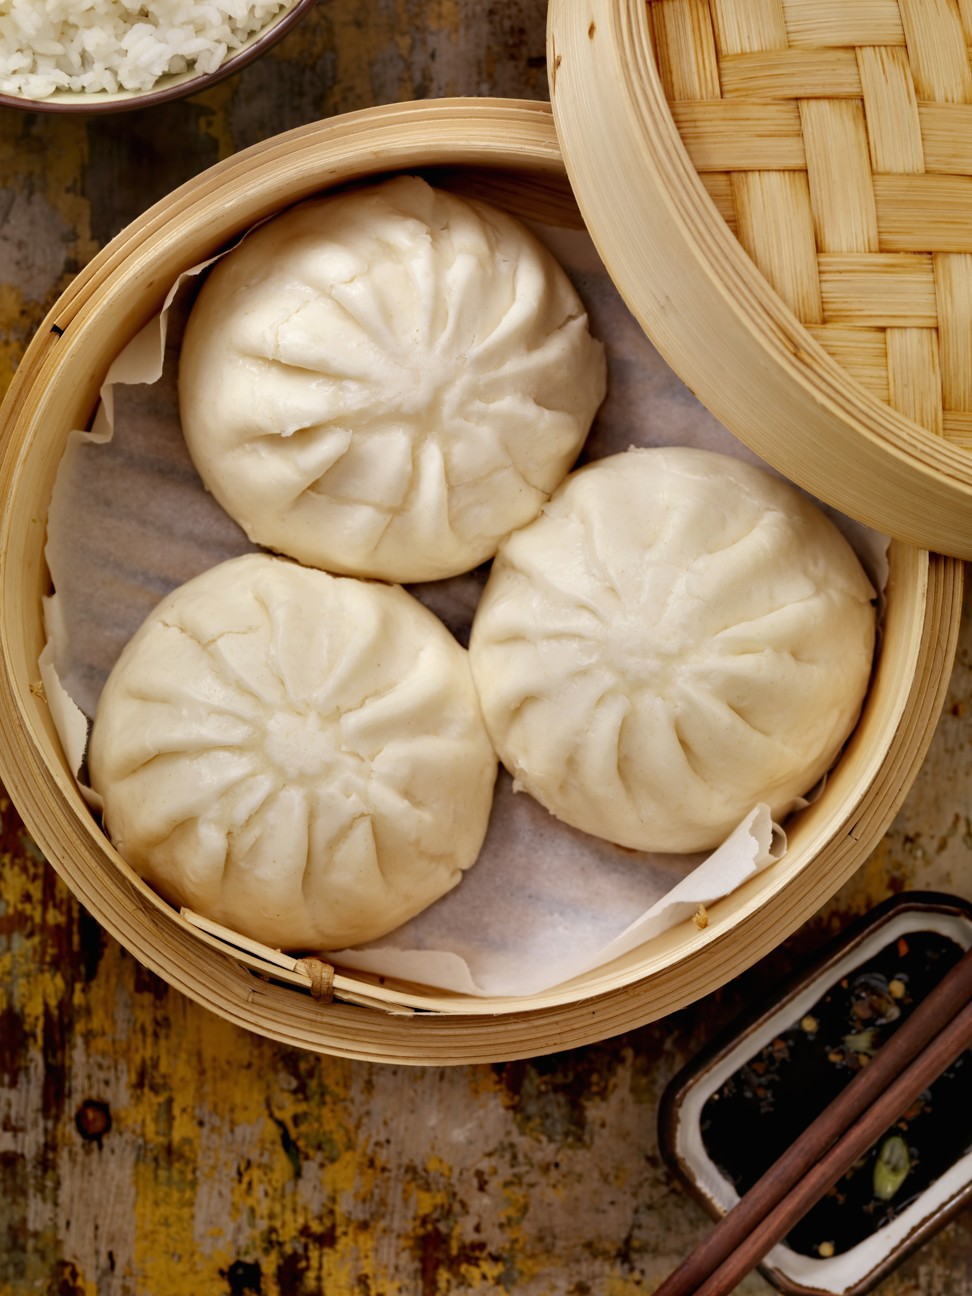 Steamed pork buns in a bamboo steamer with soy sauce and rice. But should you be ordering chicken instead? Photo: Getty Images